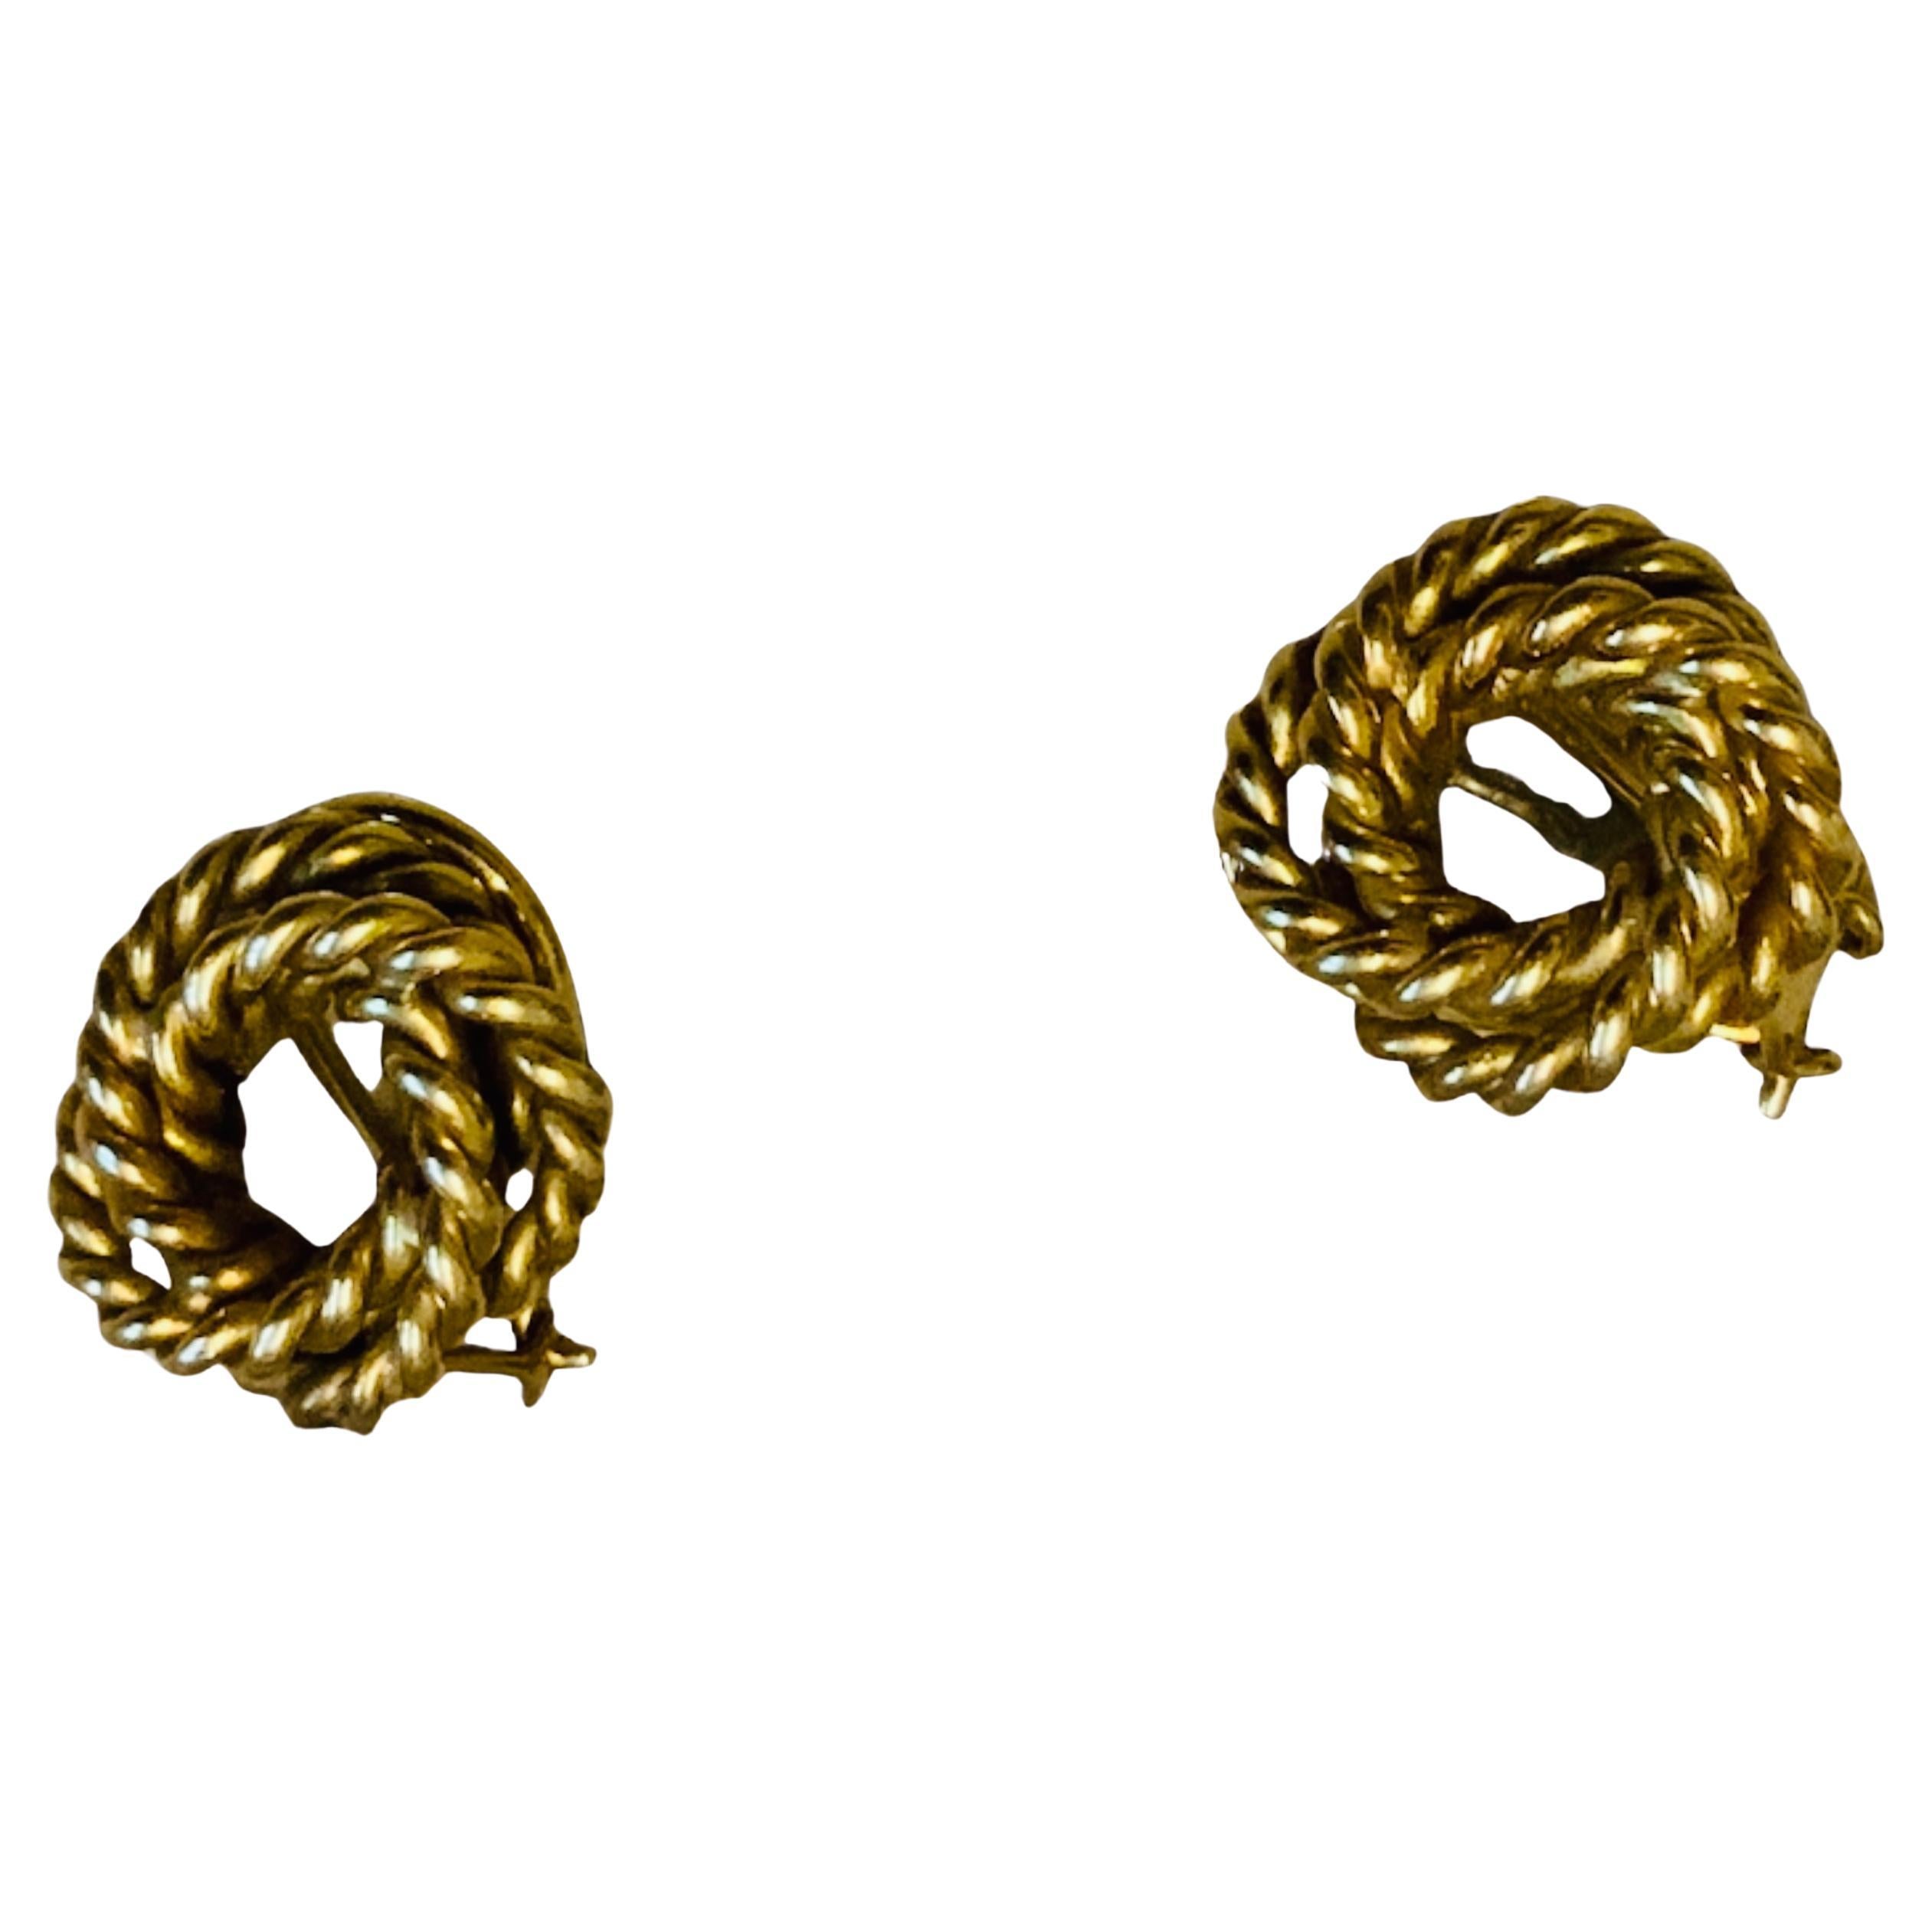 This is an 18K Gold Pair of Clip Earrings. It depicts a gold rope enrolled and twisted few times to form a circle. Both of them are hallmarked 18K in the back.